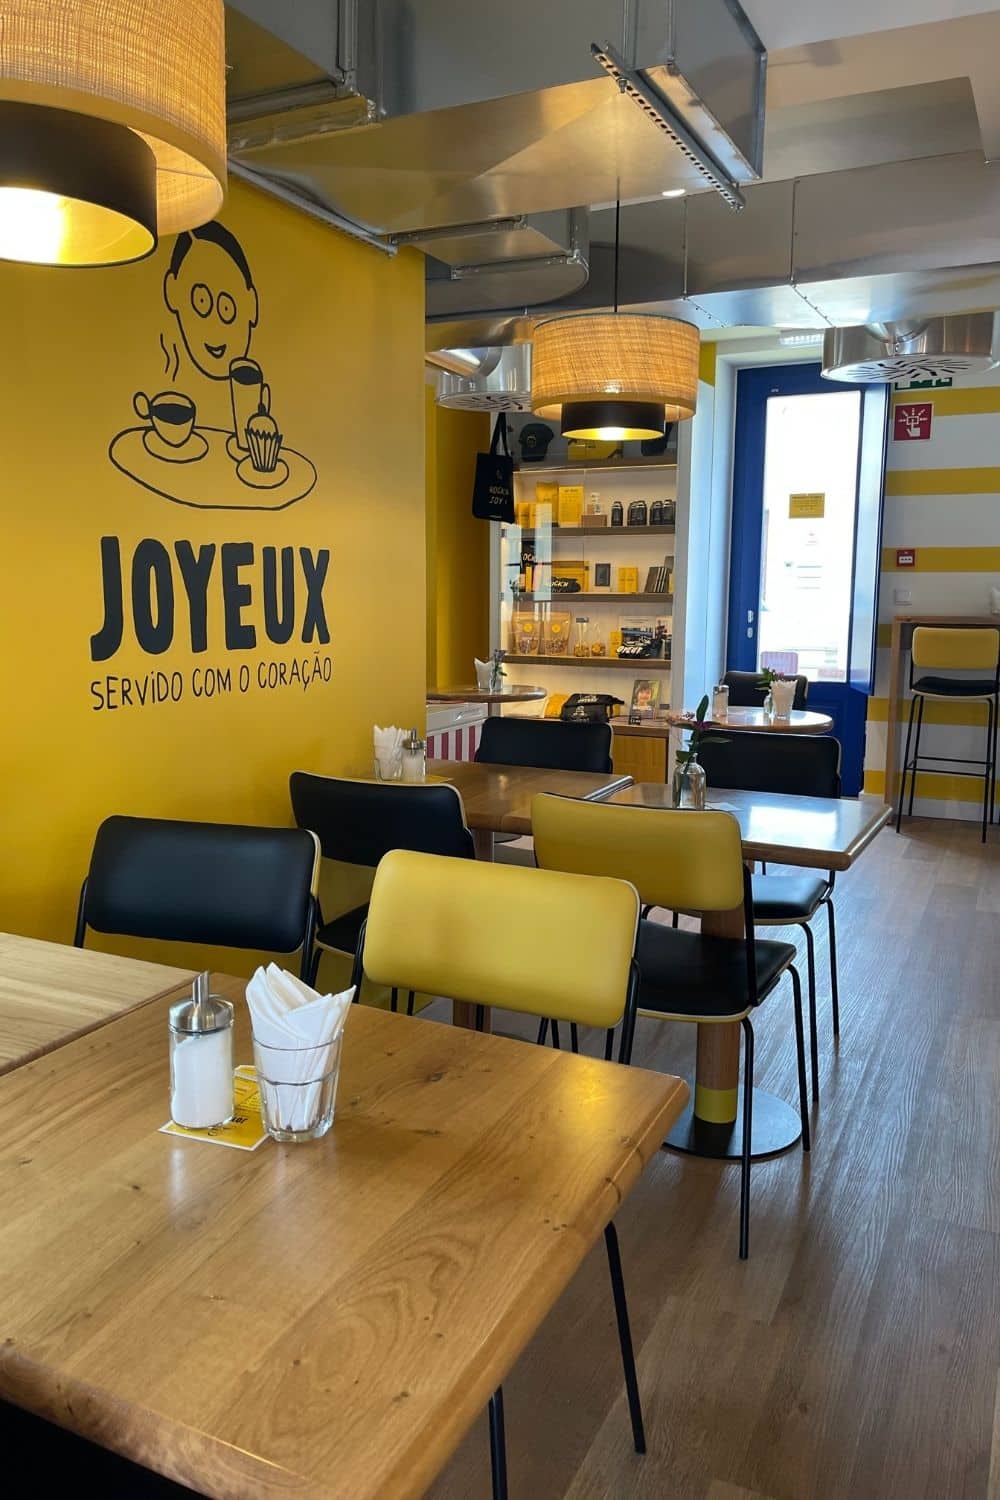 Inside a café with a warm and inviting ambiance. The interior is brightly lit with natural light. The yellow walls are adorned with a simple, playful drawing of a man enjoying coffee and a dessert, accompanied by the café's slogan "SERVIDO COM CORAÇÃO" (Served with heart). Wooden tables with yellow and black chairs are neatly arranged, and the counter area displays an assortment of goods.